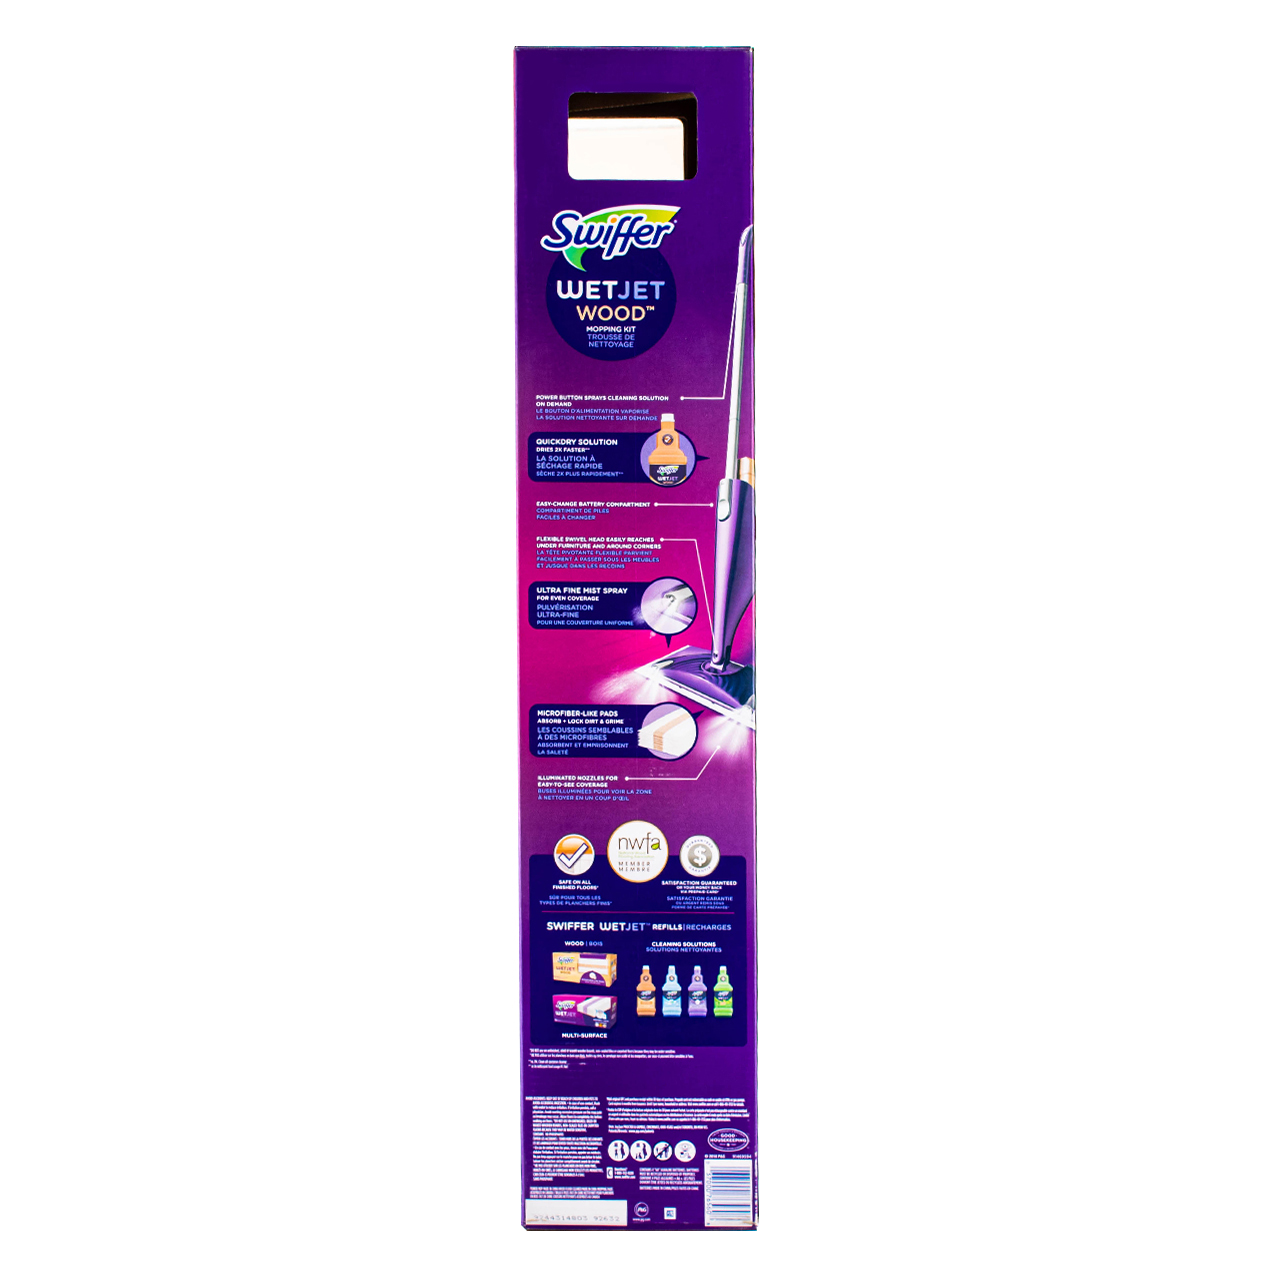 Swiffer WetJet Wood Mop Kit (1 Spray Mop, 5 Mopping Pads, 1 Cleaning Solution) - image 4 of 12